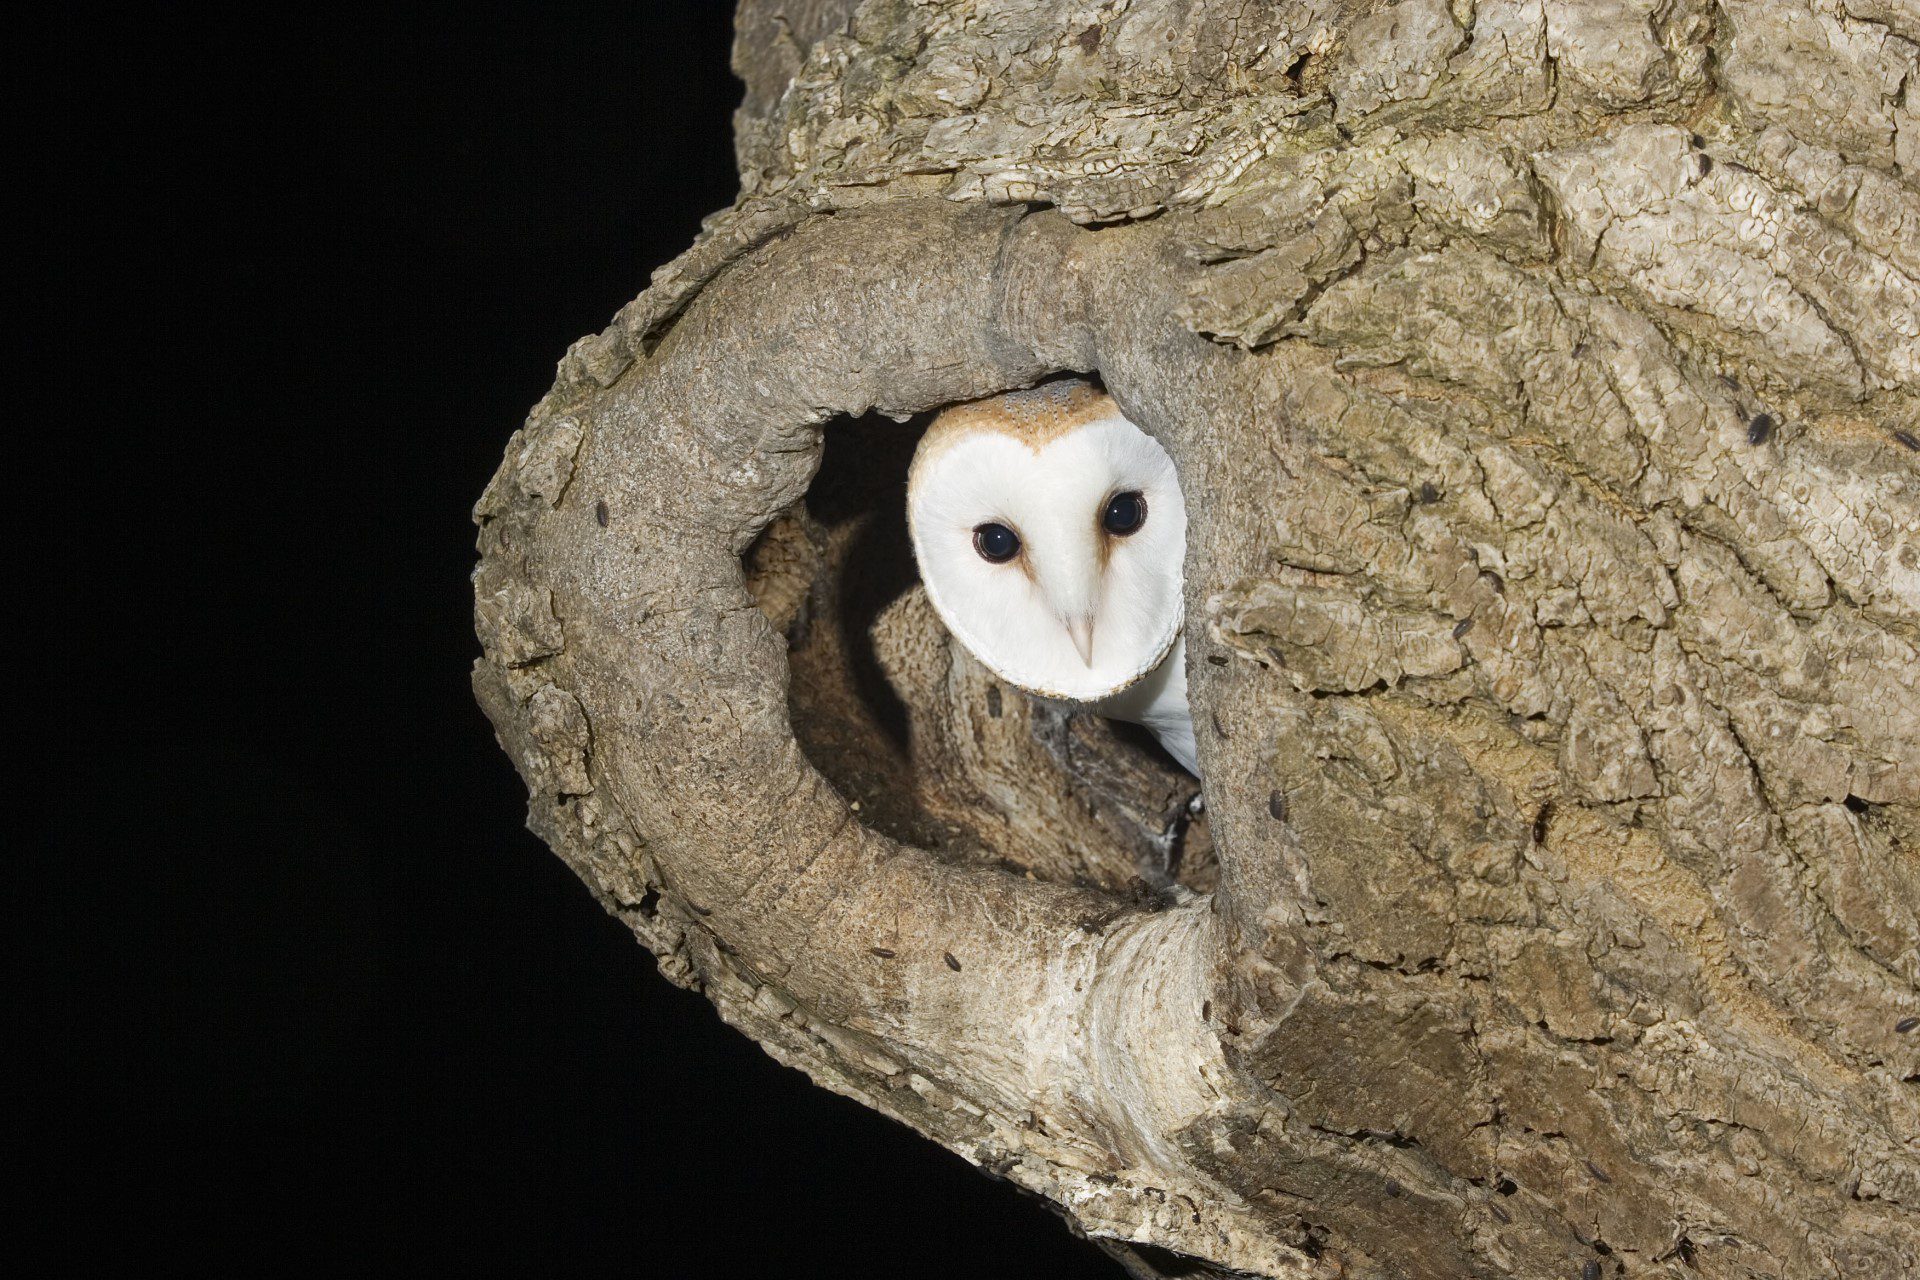 Barn Owl peering out of its nesting hole in an ash tree after dark